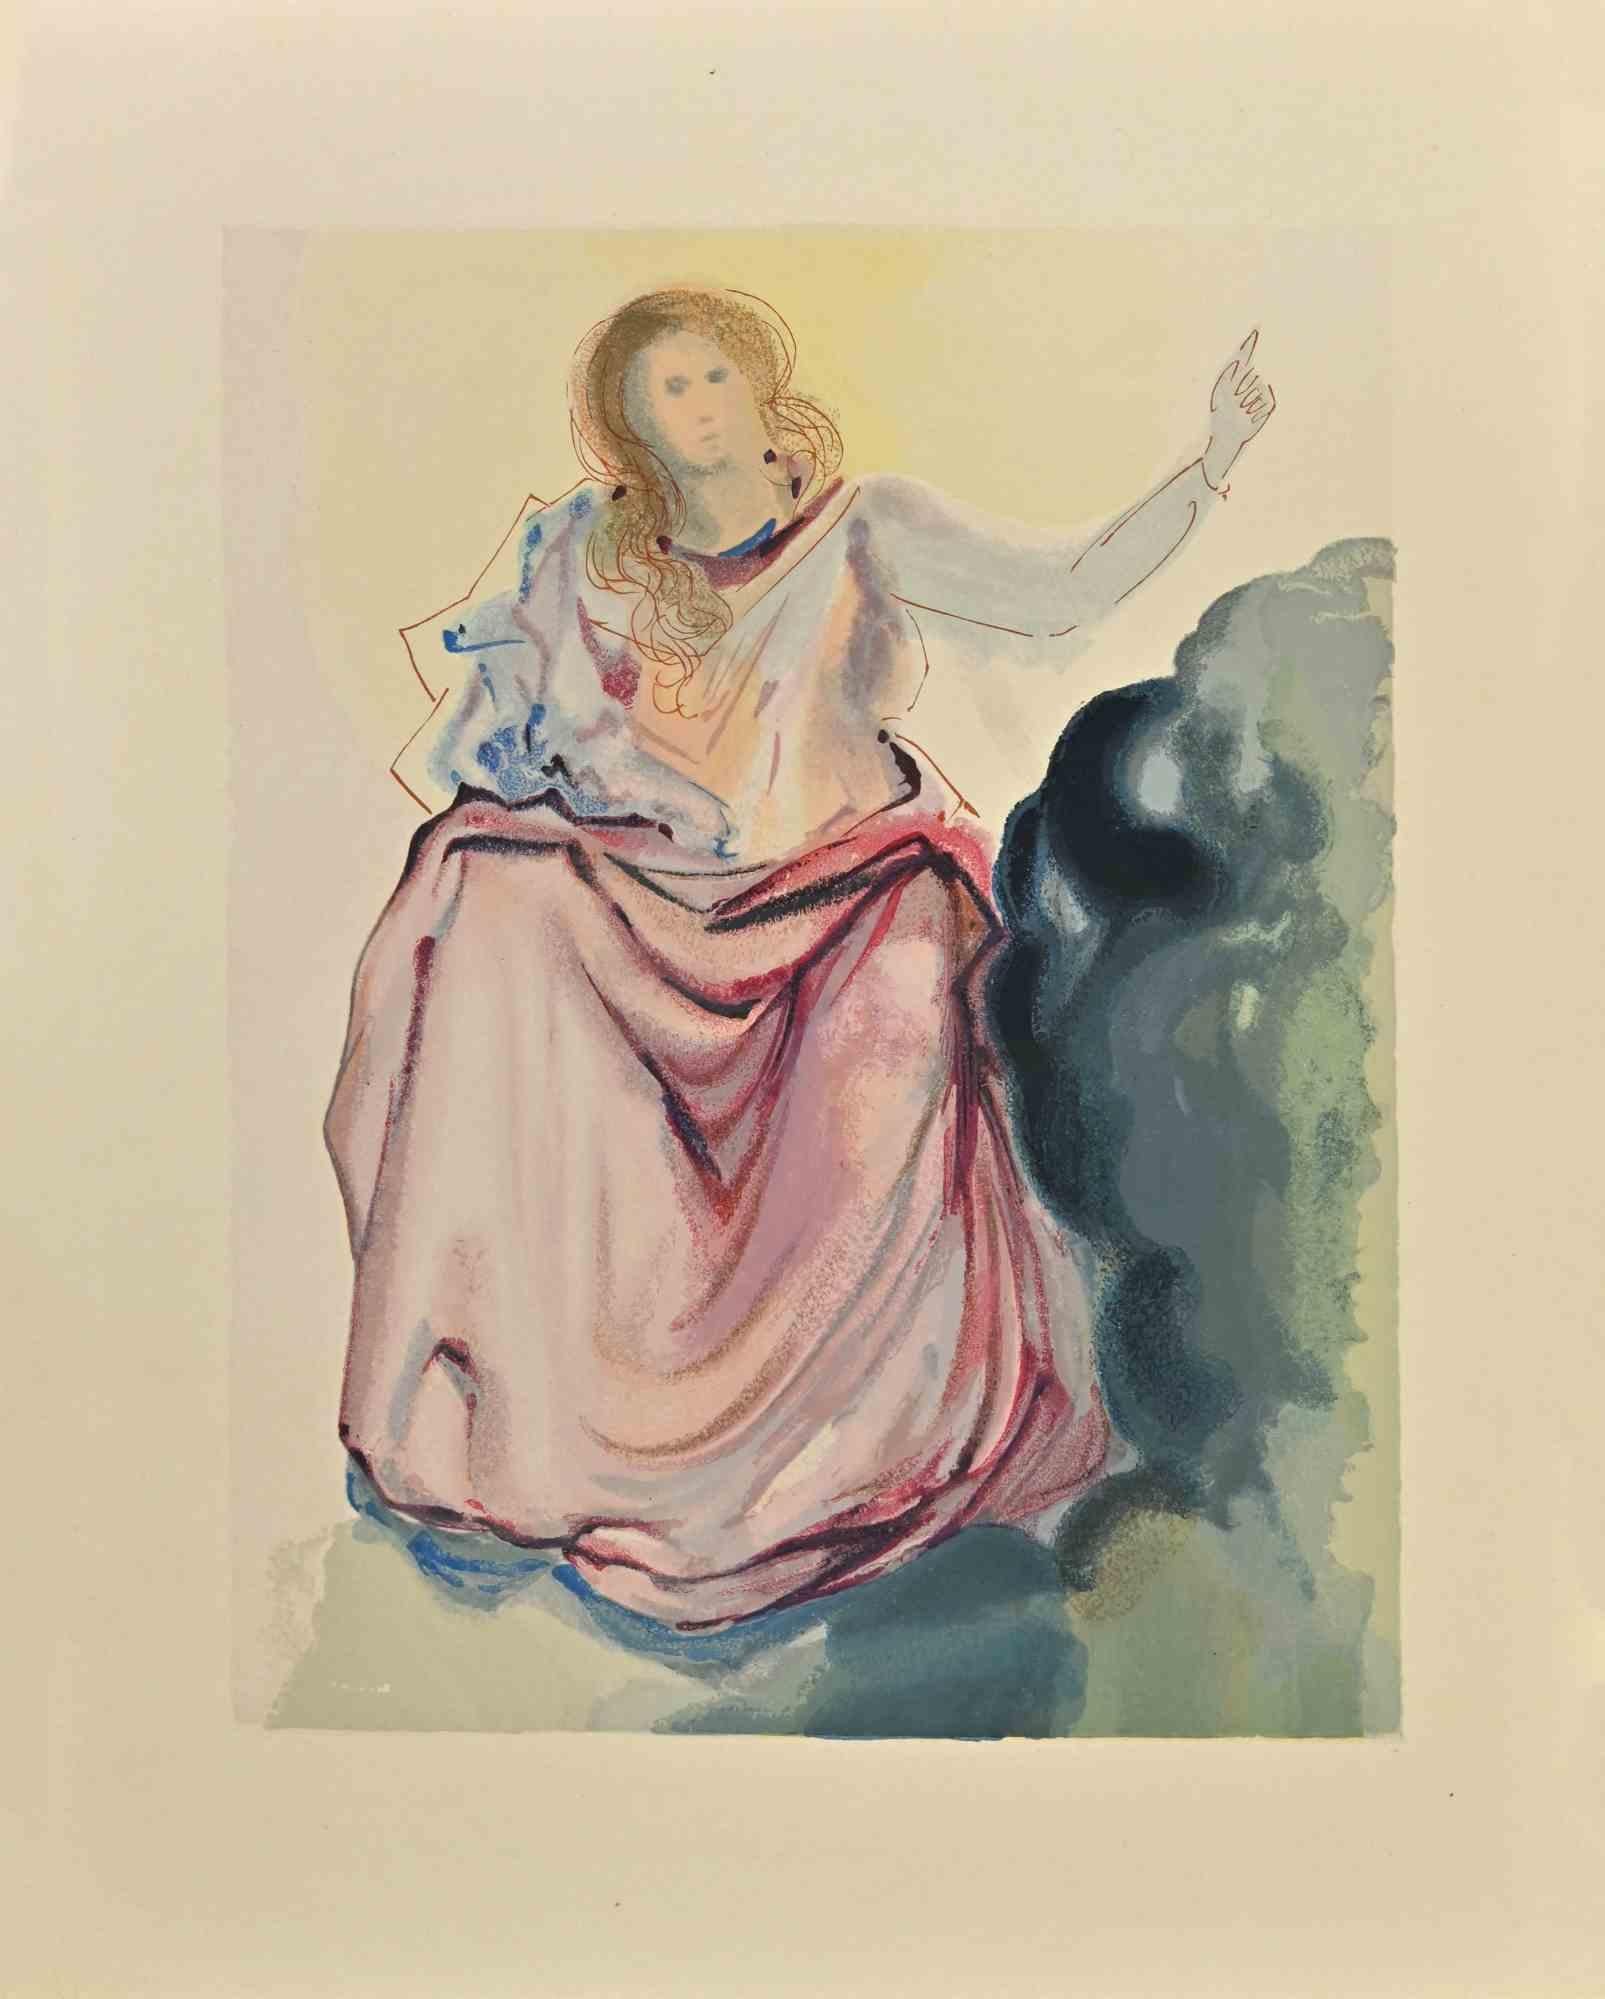 Salvador Dalí Figurative Print - Beatrice from The Series "The Divine Comedy" - Woodcut Print - 1963